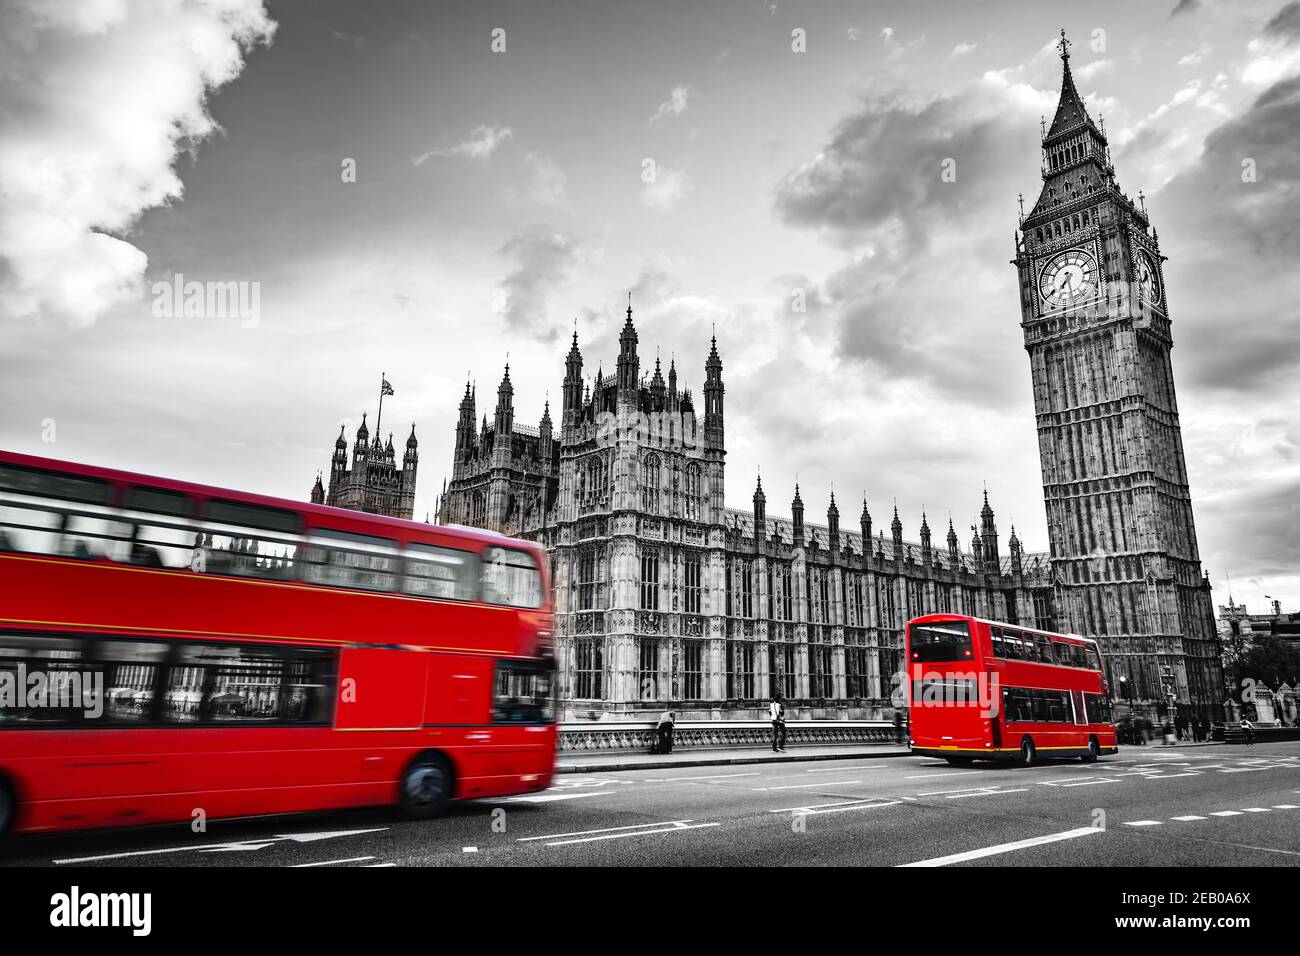 London, the UK. Red buses in motion and Big Ben, the Palace of Westminster. The icons of England in vintage, retro style. Red in black and white Stock Photo